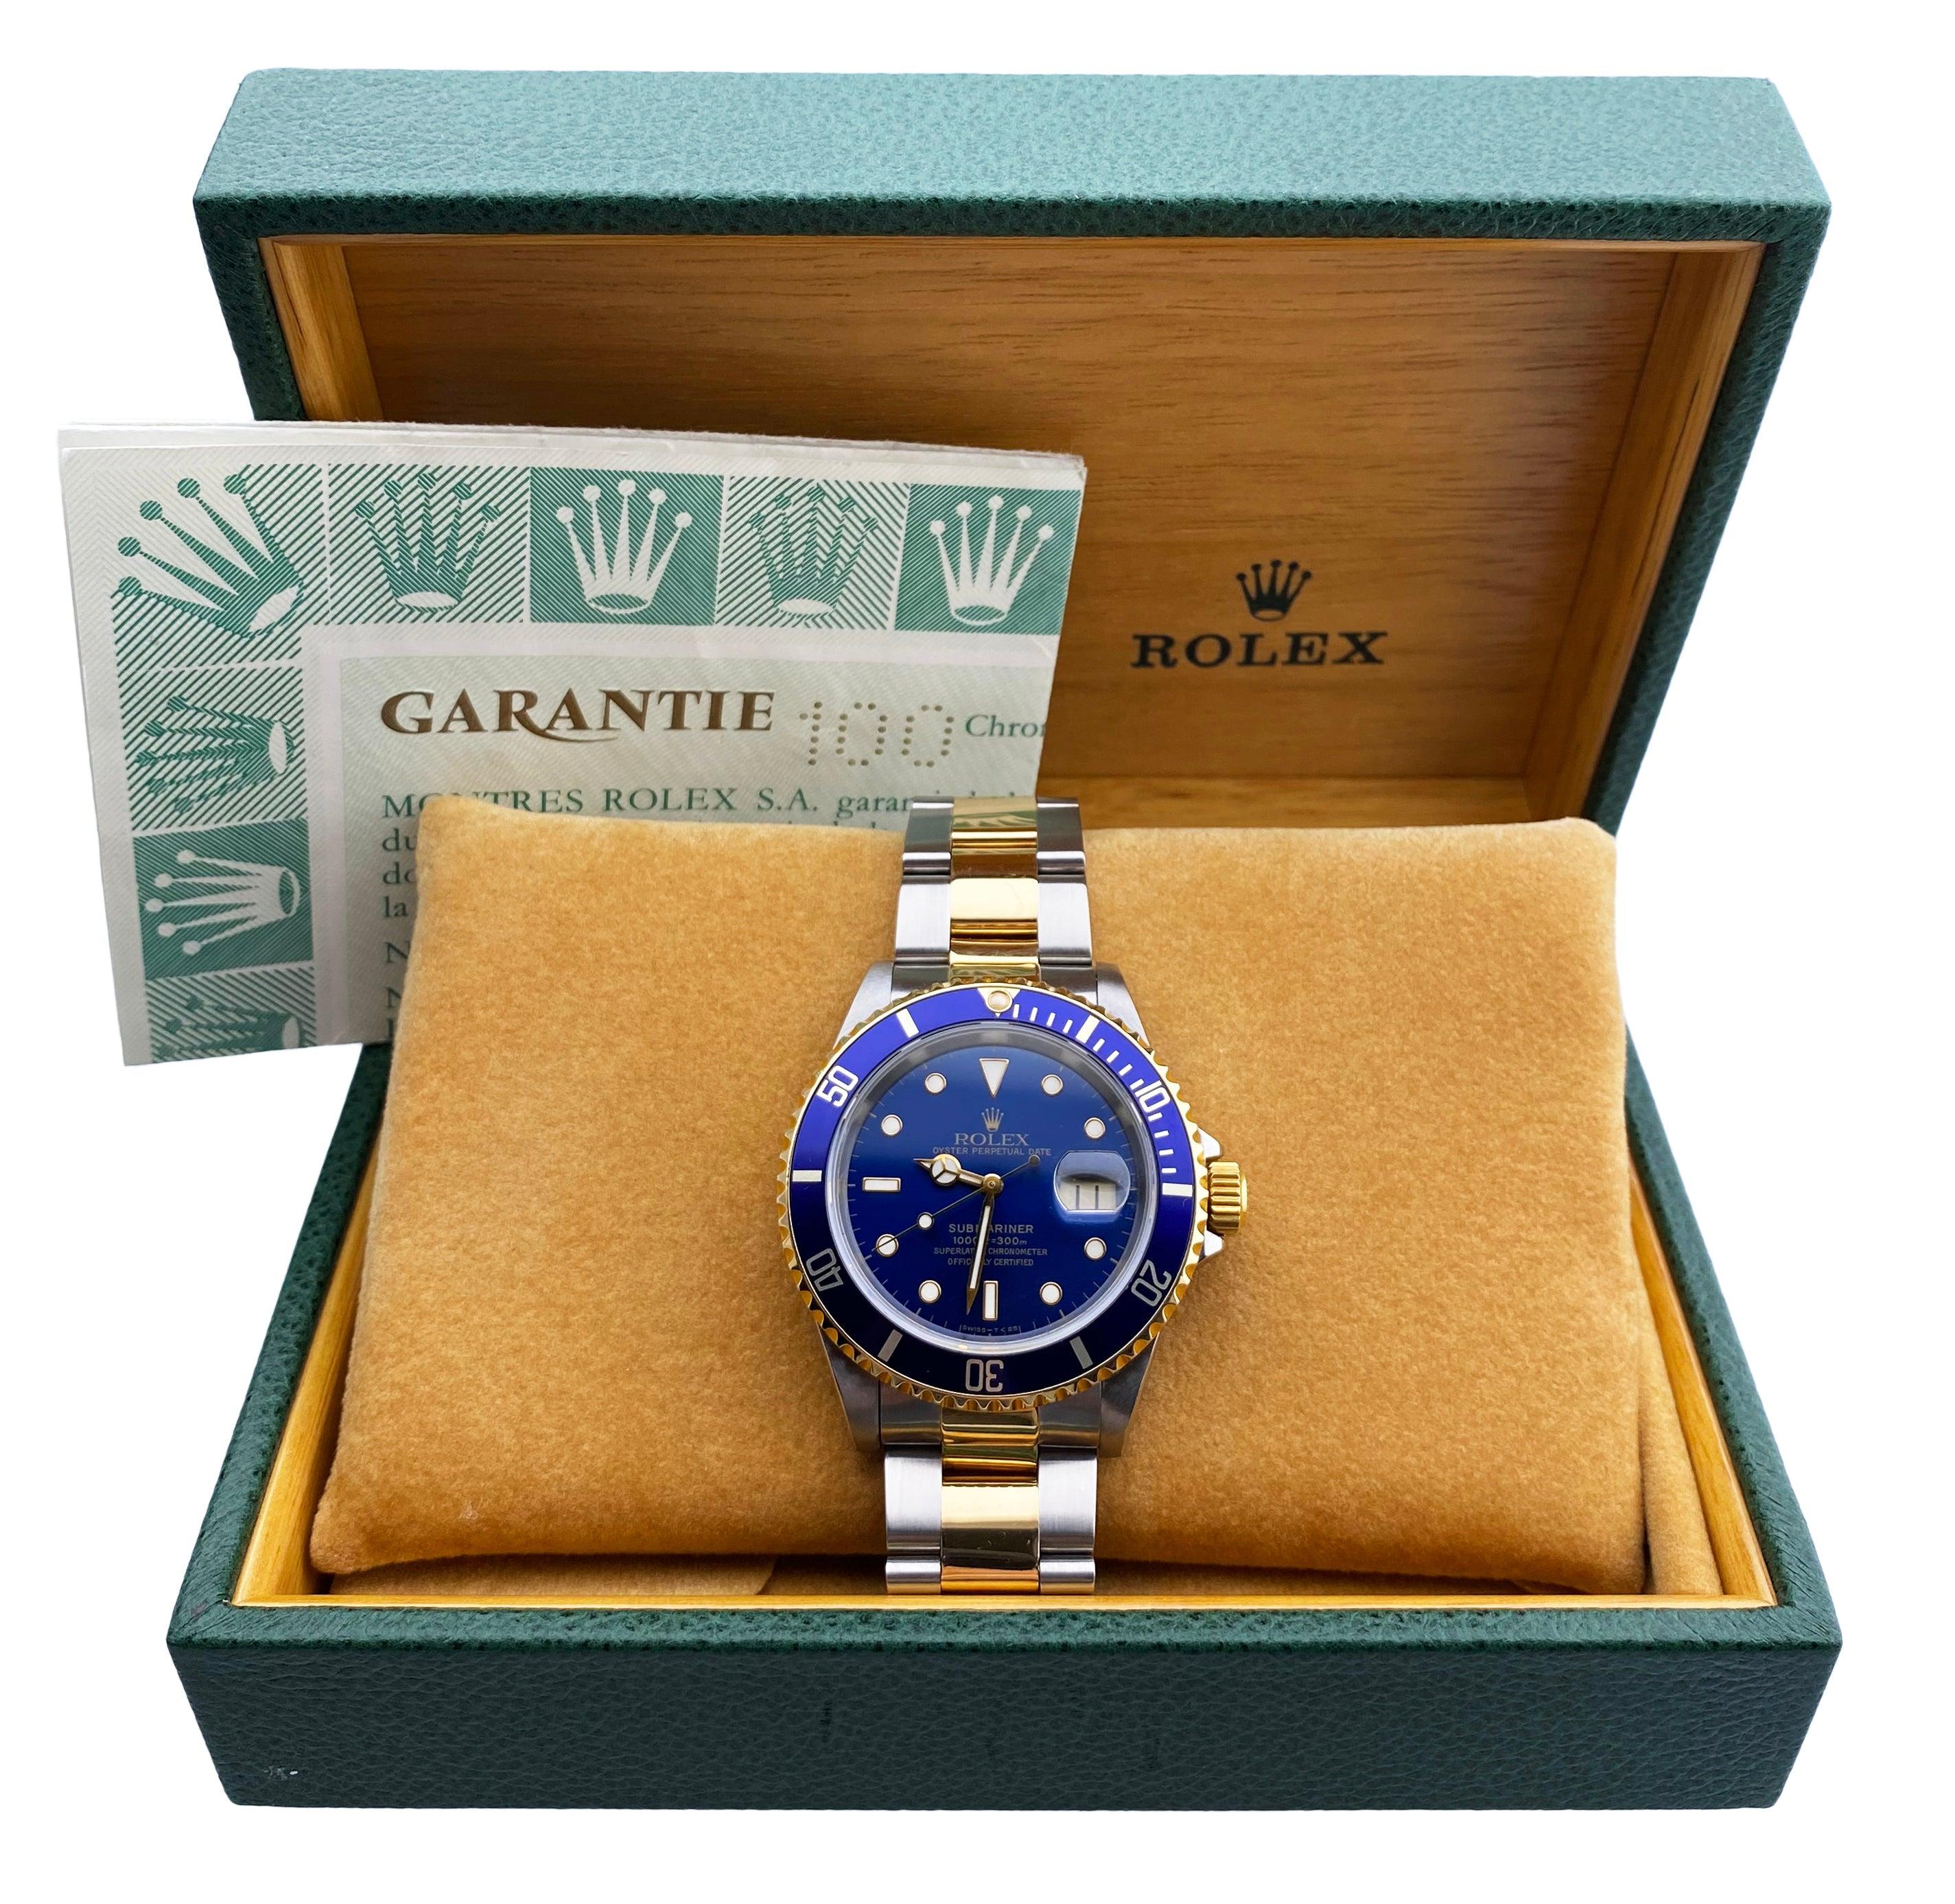 Rolex Submariner 16613 Men Watch. 40mm Stainless Steel case. 18k yellow gold bezel with blue insert. Blue dial with Luminous Steel hands and luminous dot hour markers. Date display at the 3 o'clock position. Oyster two tone, 18K yellow gold &